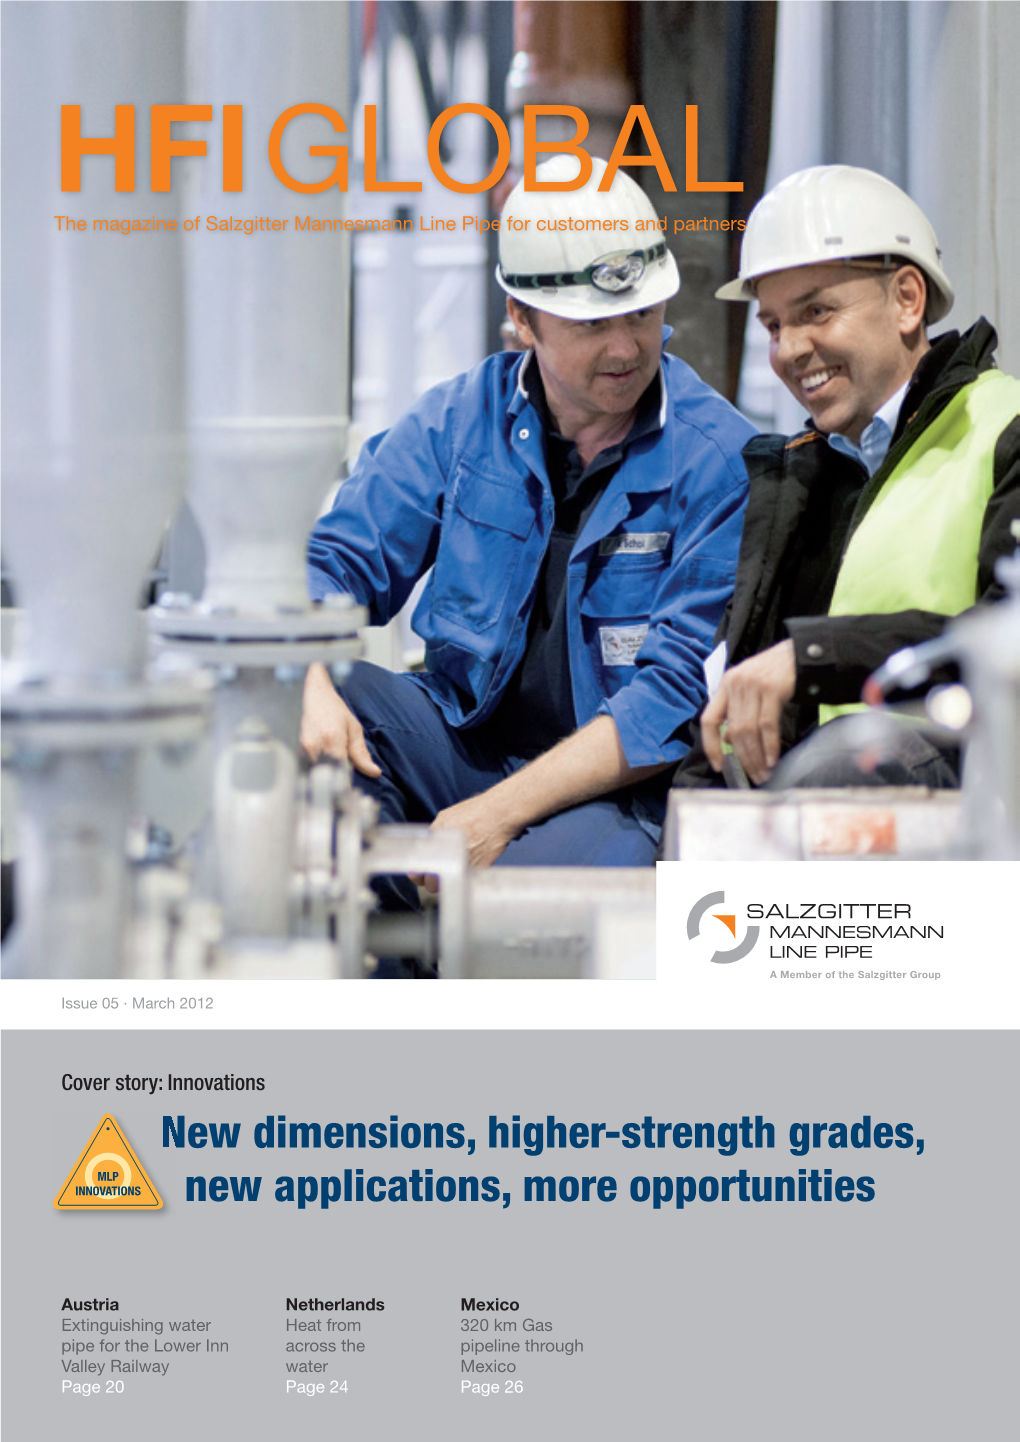 New Dimensions, Higher-Strength Grades, New Applications, More